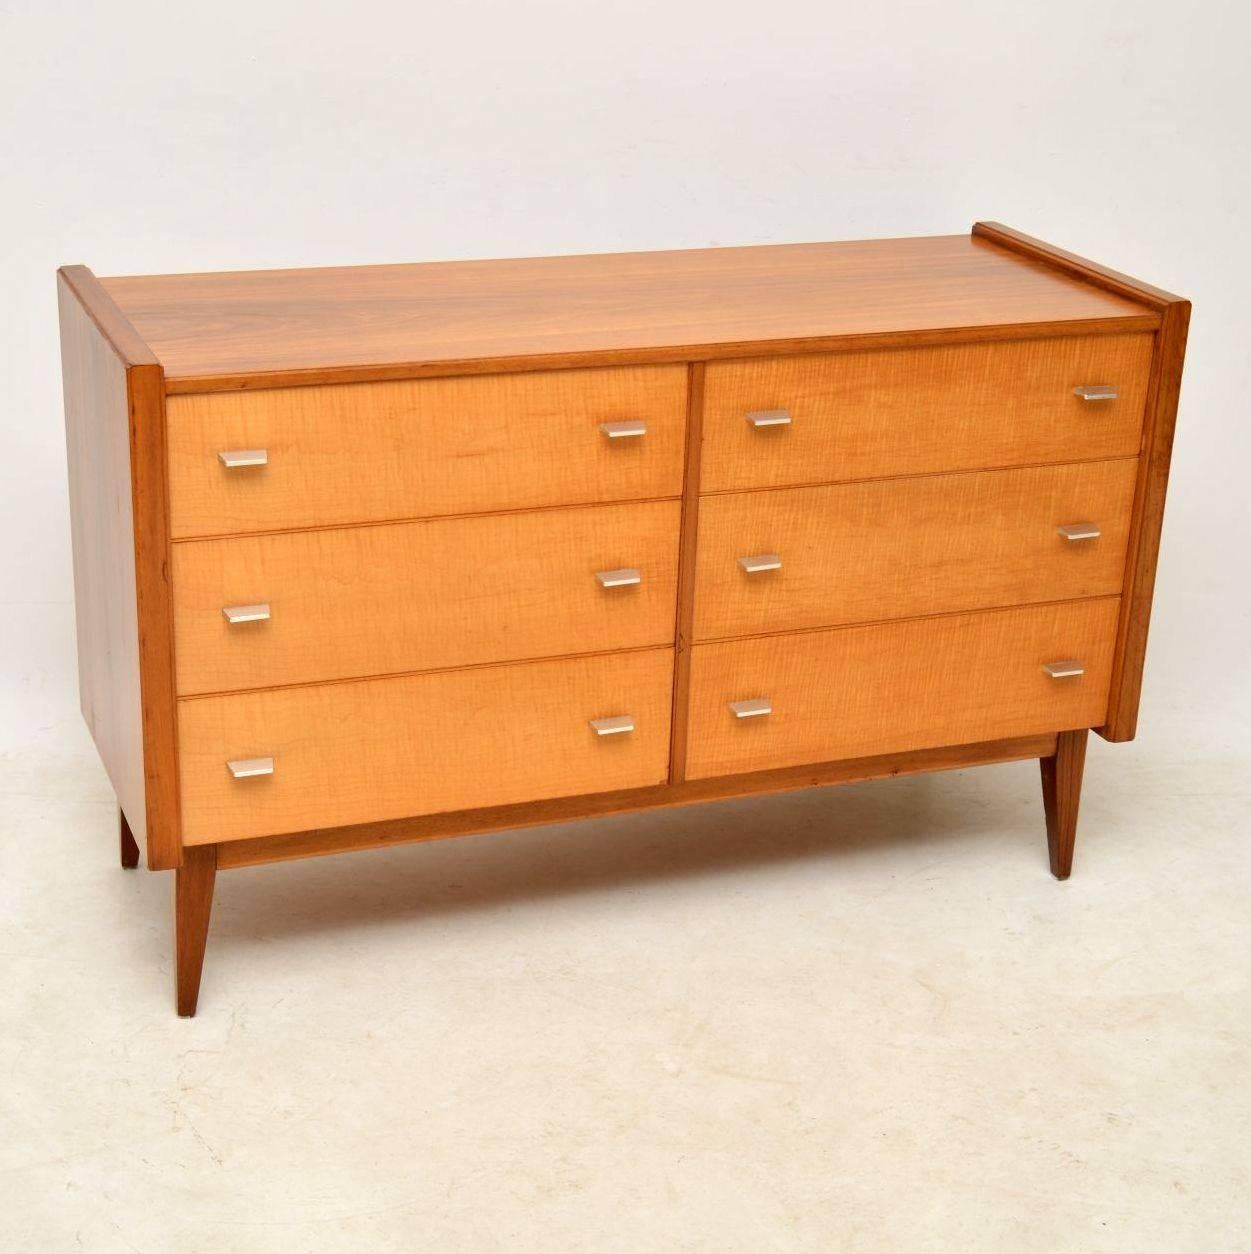 A beautiful and top quality vintage sideboard by the high end British manufacturer Alfred COX. This has a walnut carcass with sycamore drawers fronts. It’s extremely well made and is very heavy, with lots of storage space in the six drawers. The